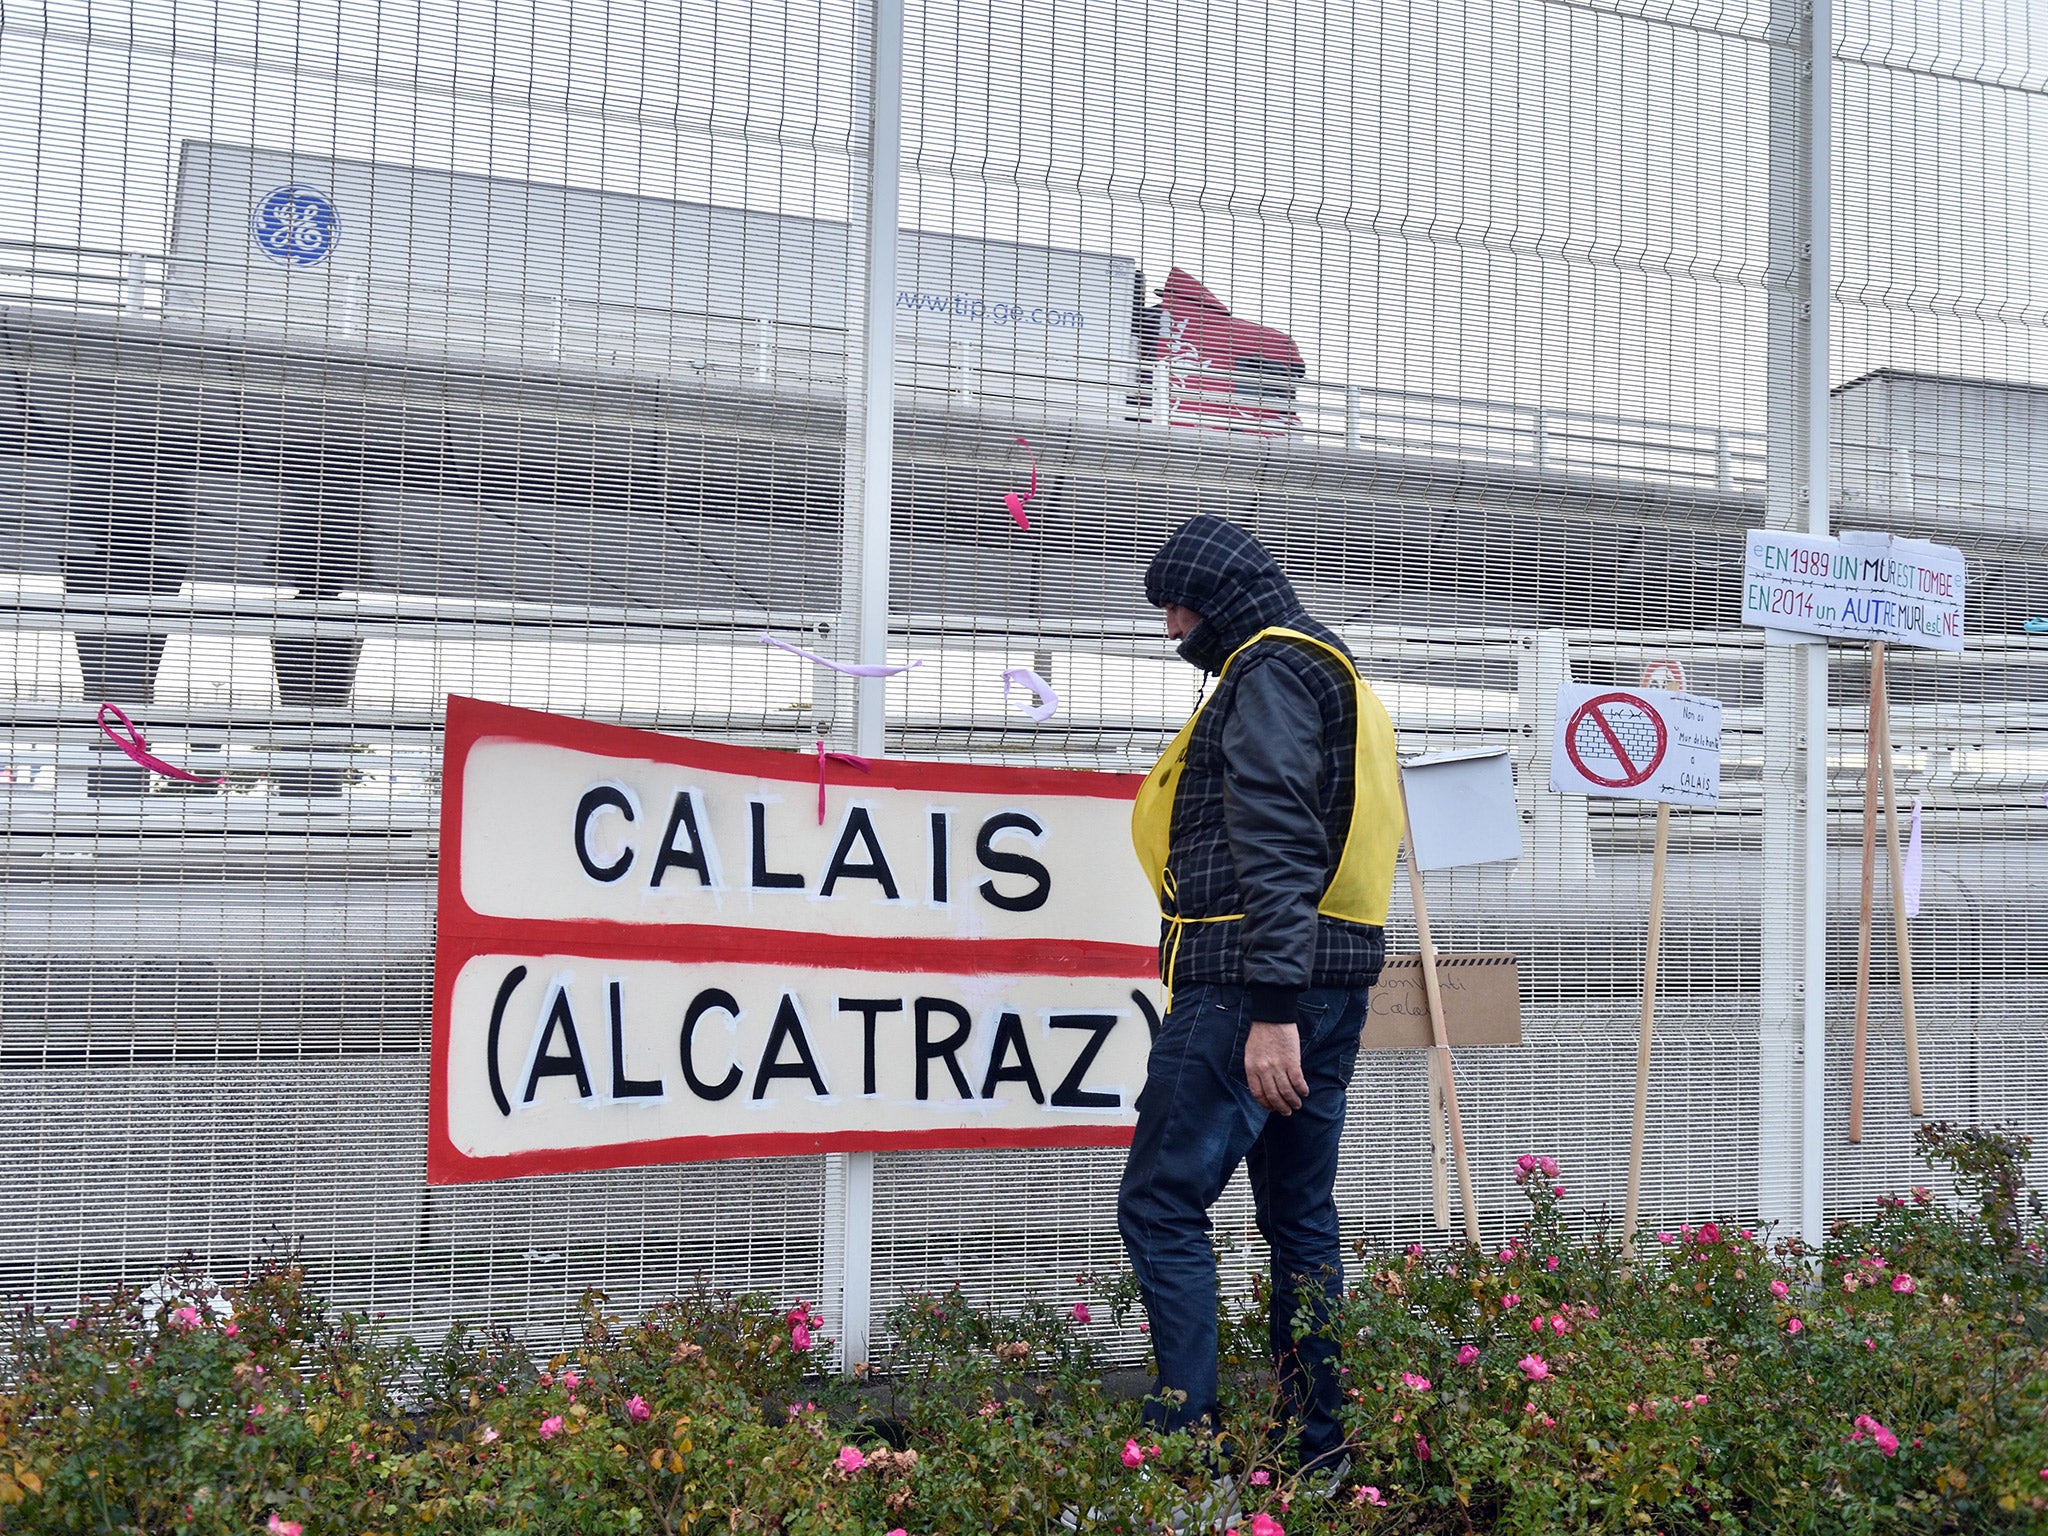 An 'incident' at the Calais terminal on Saturday caused further delays